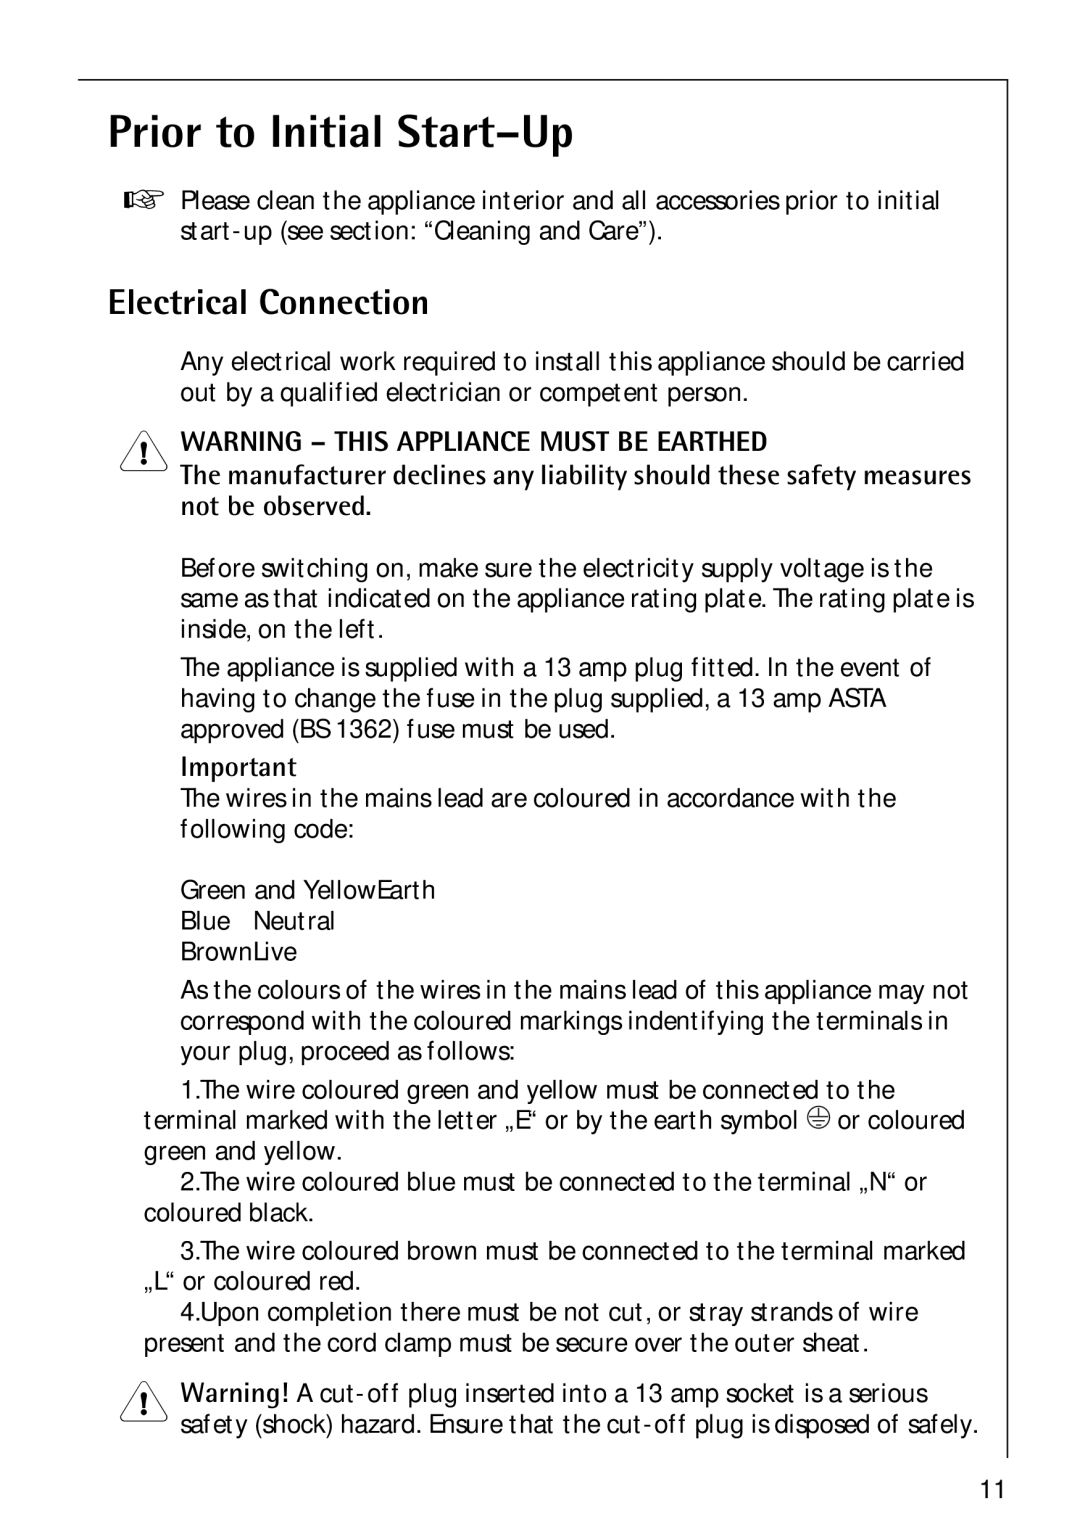 Electrolux Santo 1573TK-4 Prior to Initial Start-Up, Electrical Connection, Warning - This Appliance Must Be Earthed 